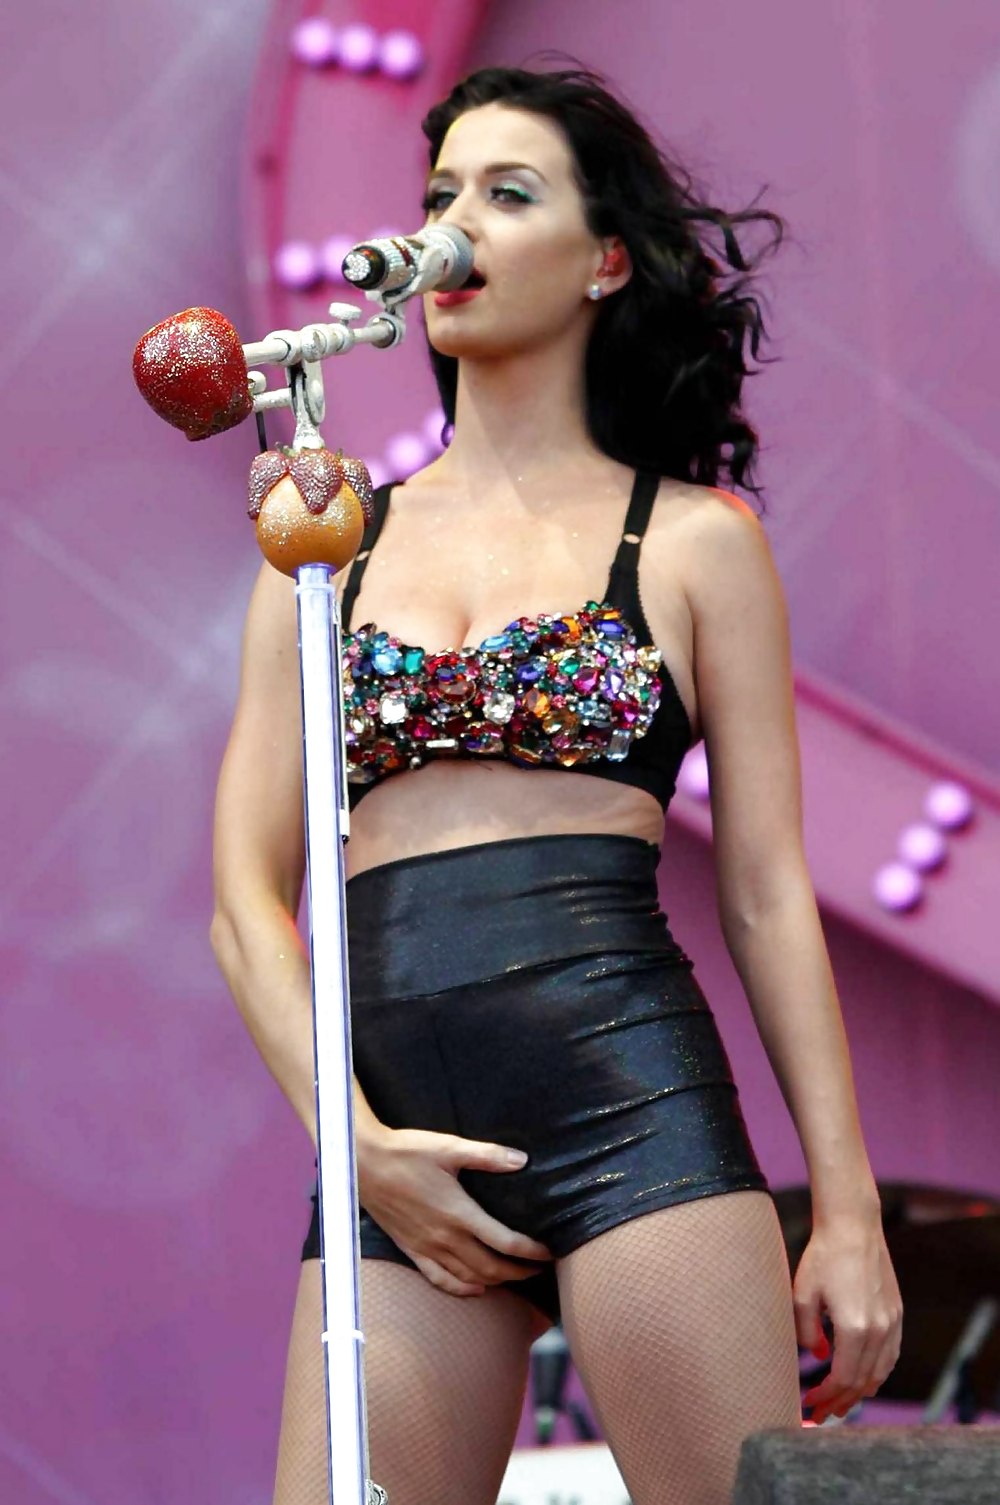 Katy Perry By twistedworlds #1487638